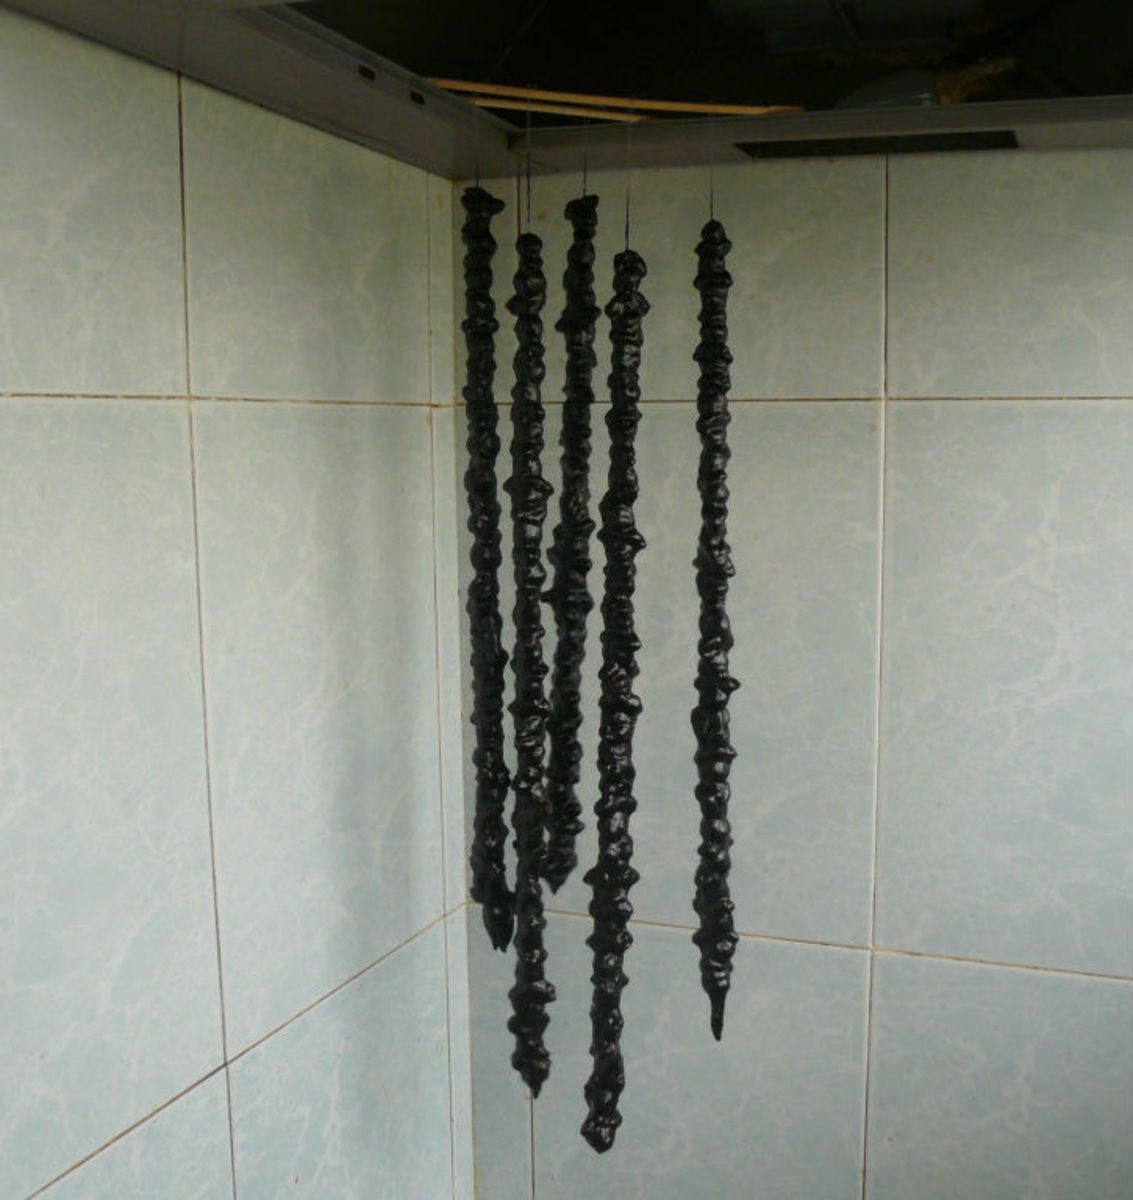 Once chirchkhela stops dripping, hang it somewhere to dry and get ready.